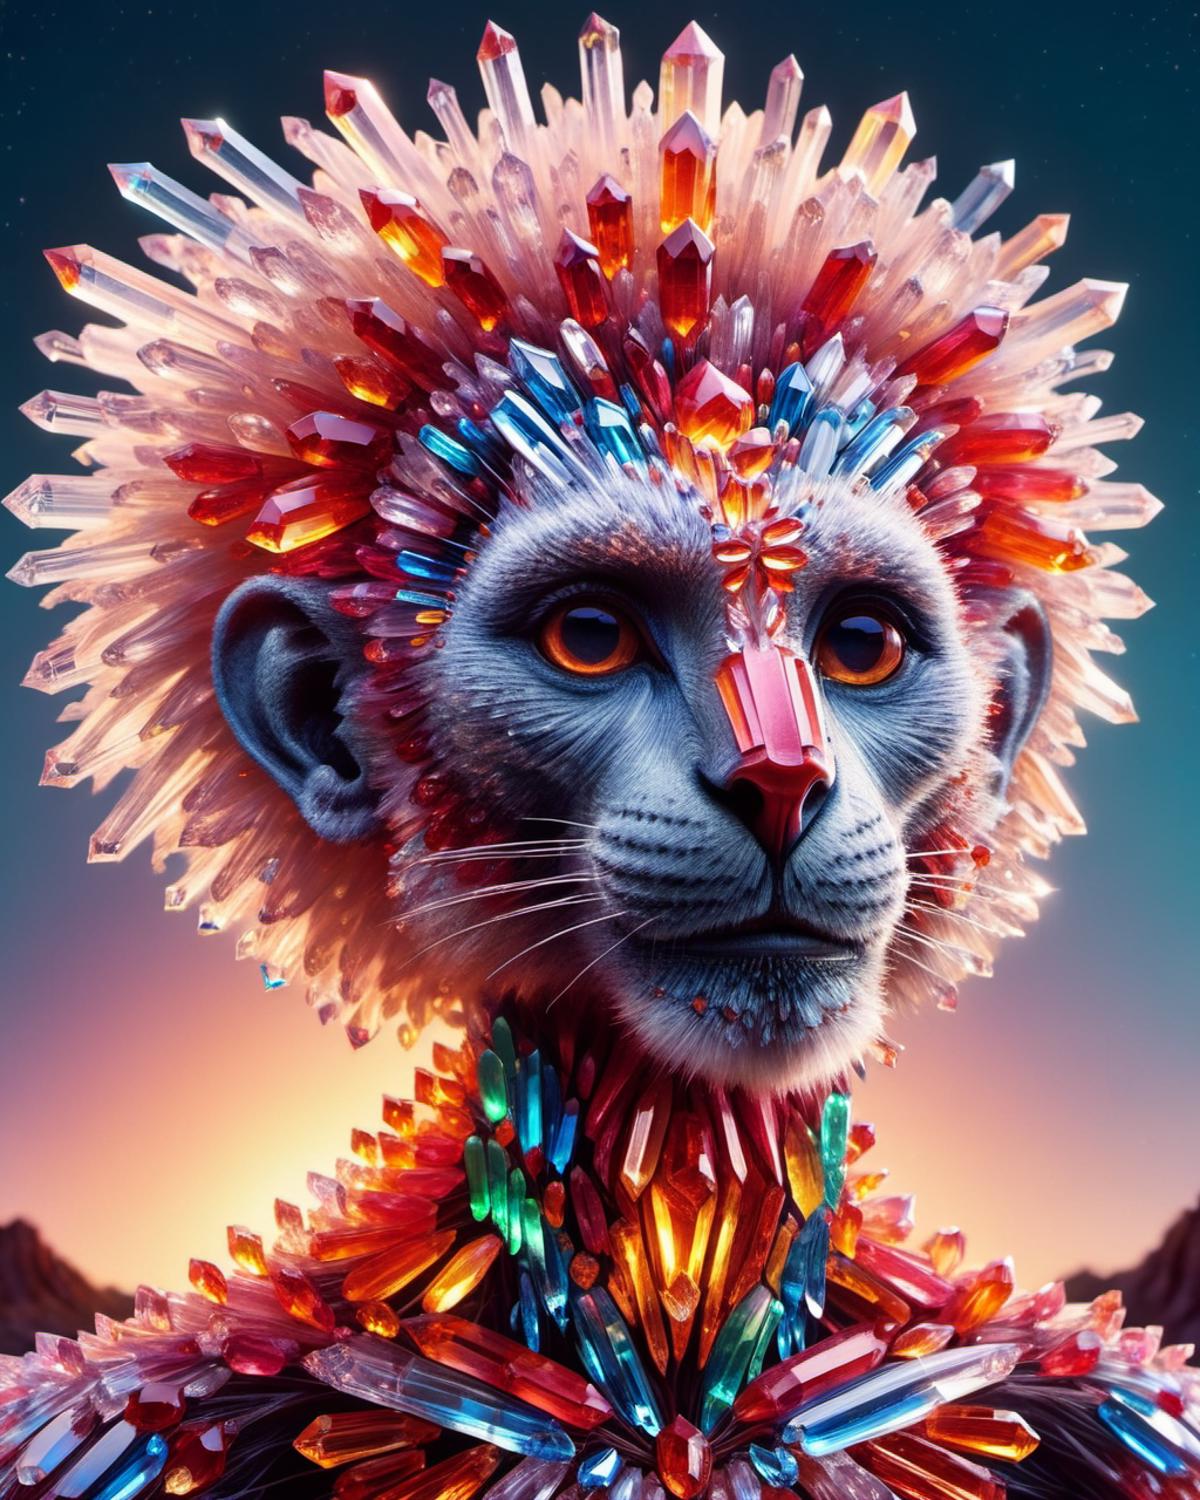 Colorful Monkey Head with Crystal Hair and Necklace.